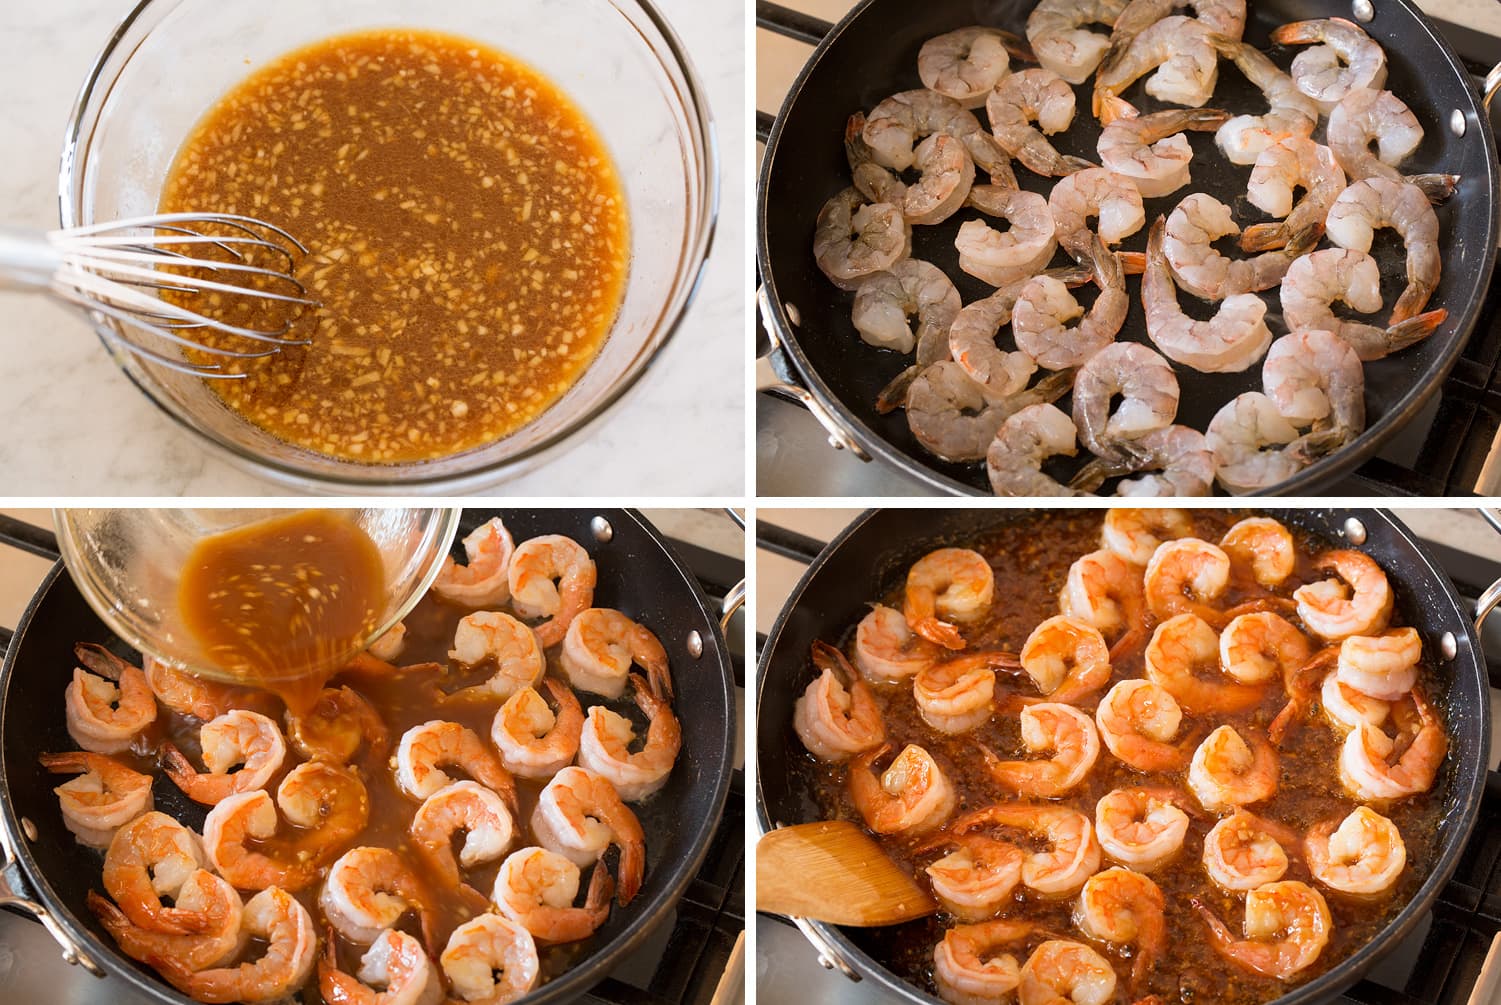 Four images showing how to make teriyaki sauce and cook with raw shrimp.